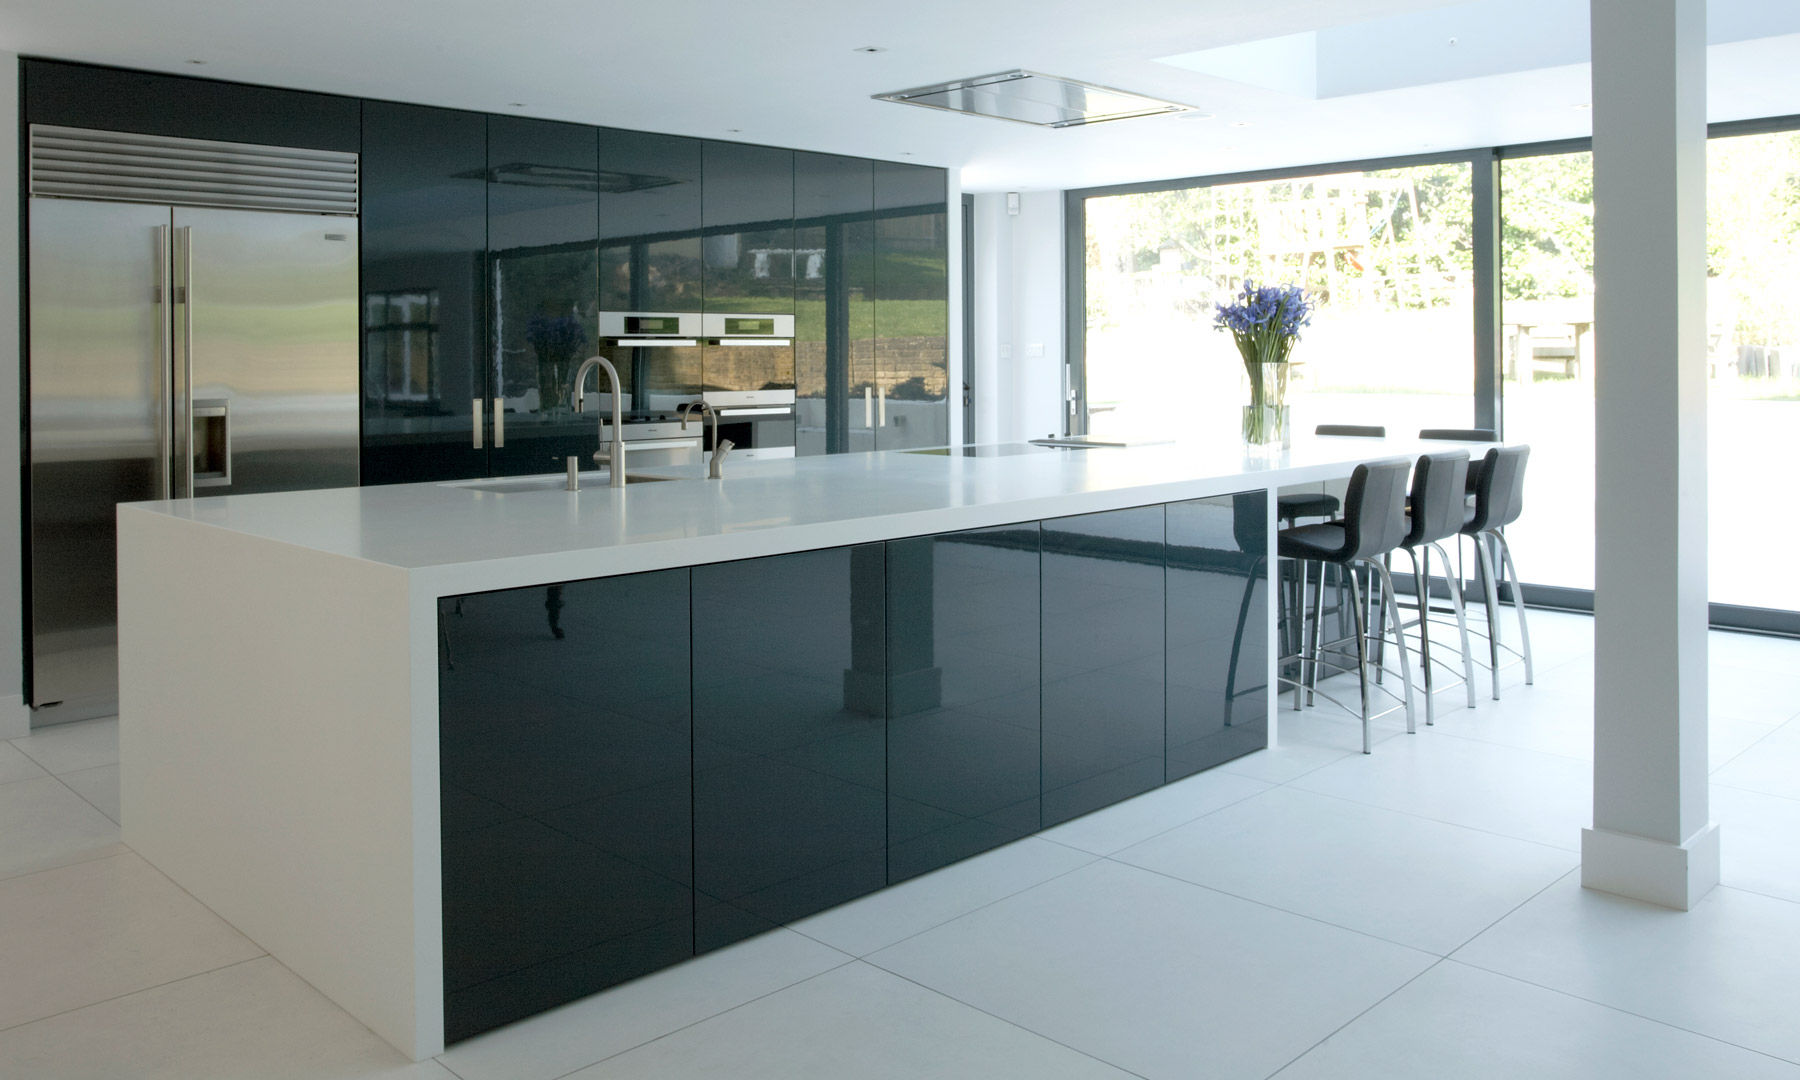 Using High Gloss Tiles For Kitchen Is Good? - Interior Design Inspirations